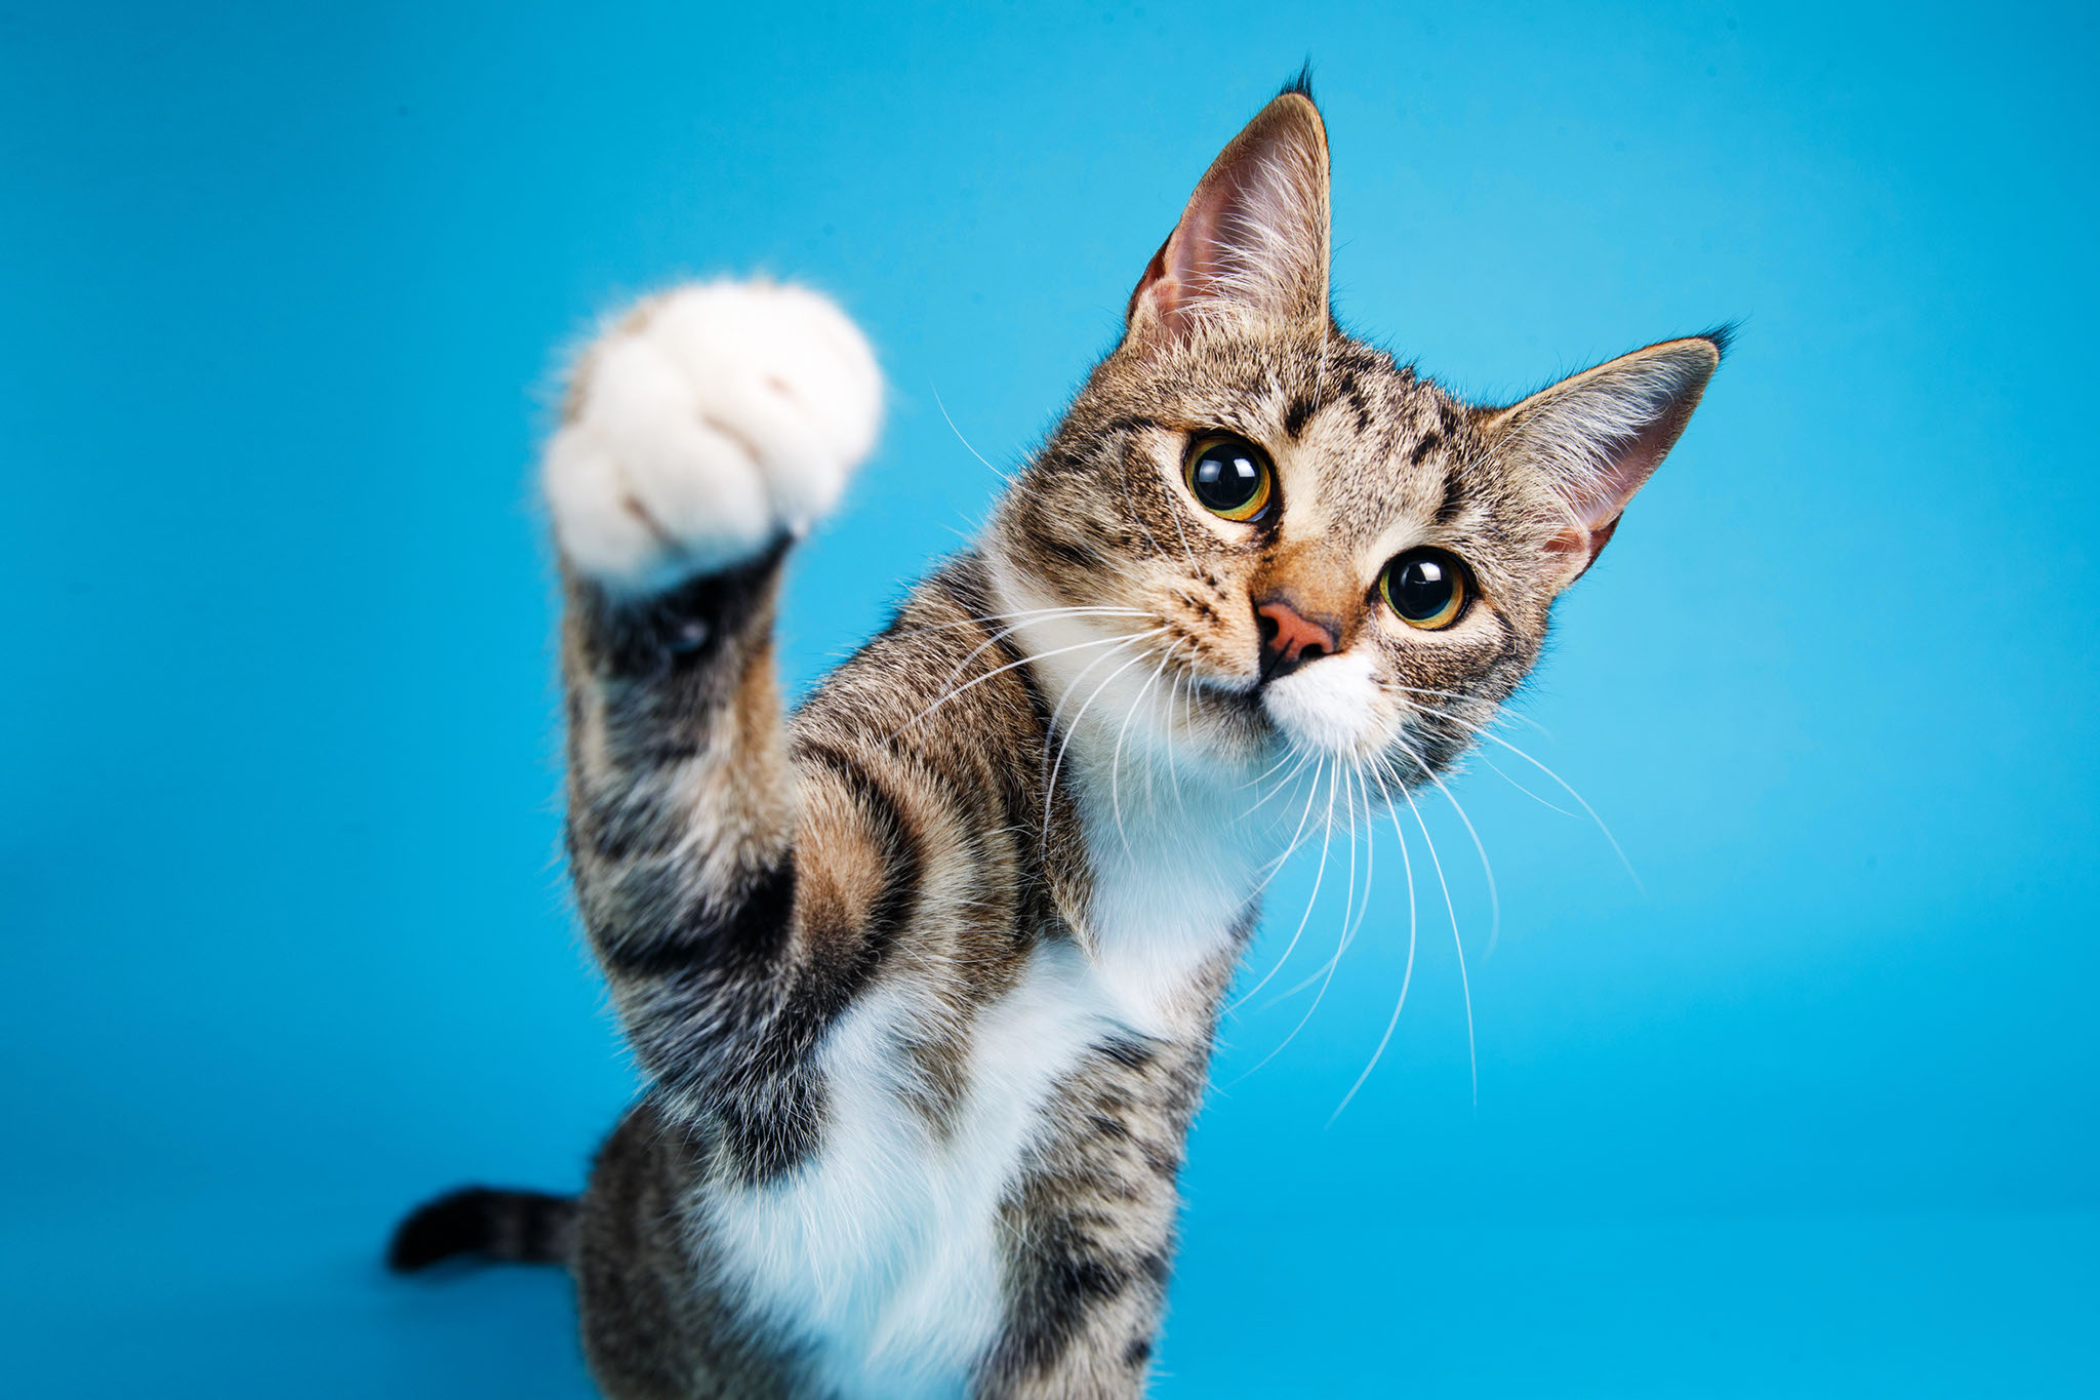 Gray tabby kitten with white paws waving at the camera.